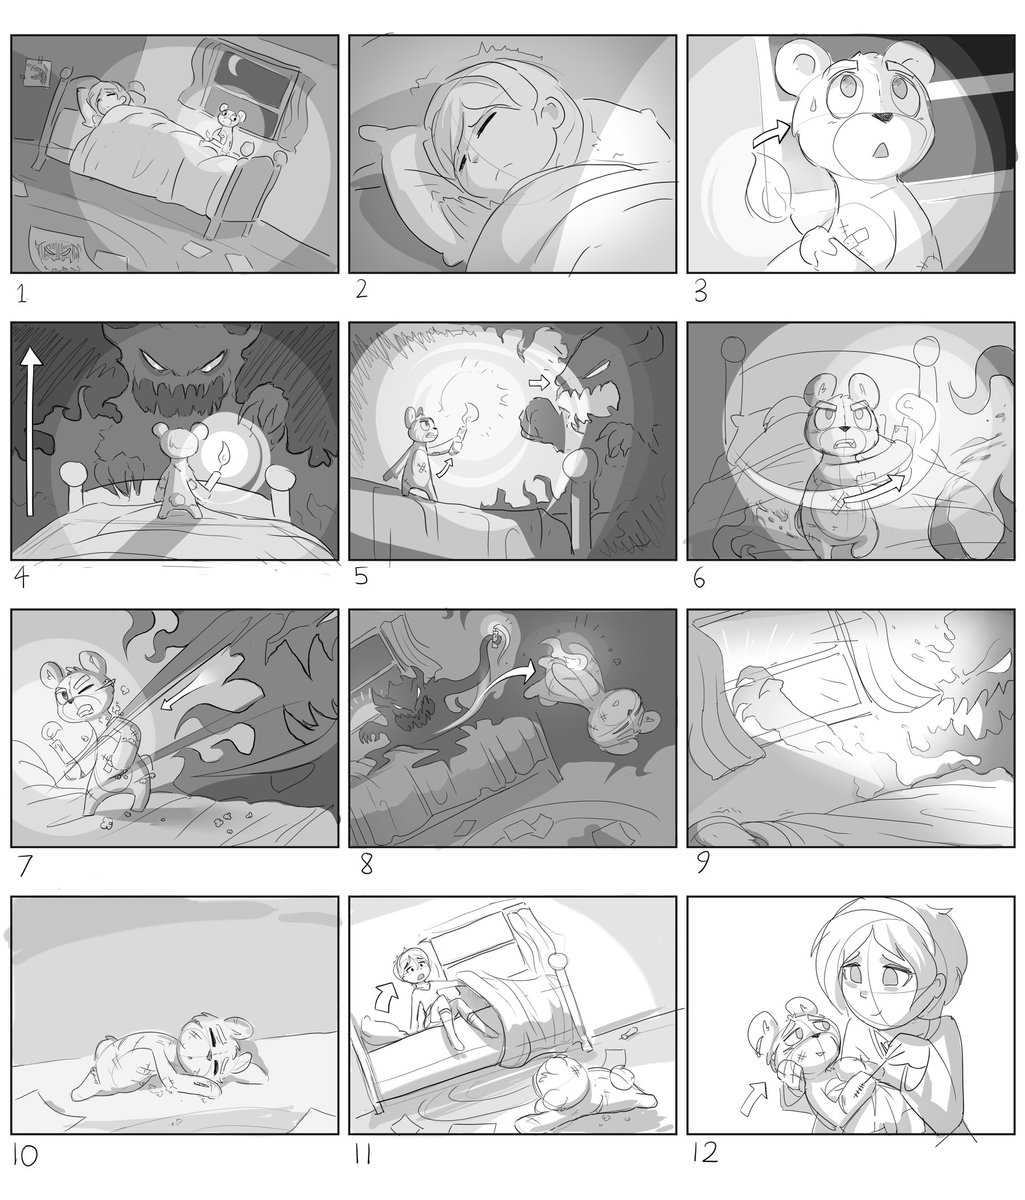 12 Frame Storyboard I did for my class!

It's about a teddy bear that has to protect a little girl from her fear of the dark 